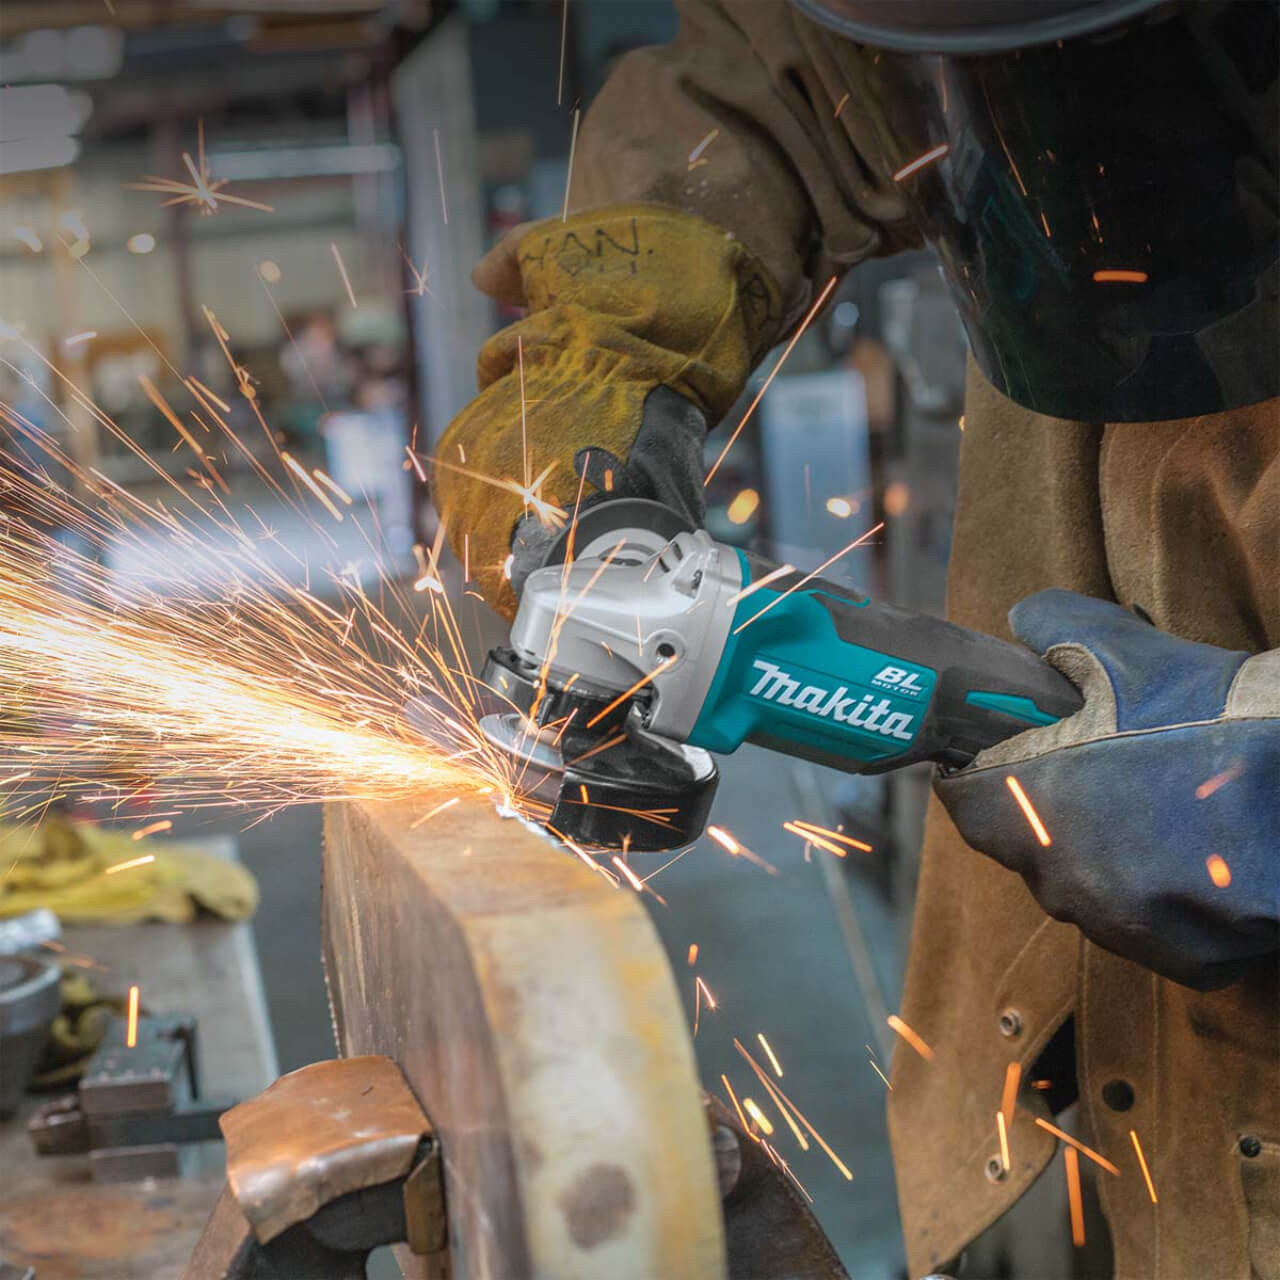 Makita 18V BRUSHLESS 125mm Angle Grinder. Paddle Switch. Kick Back Detection - Tool Only